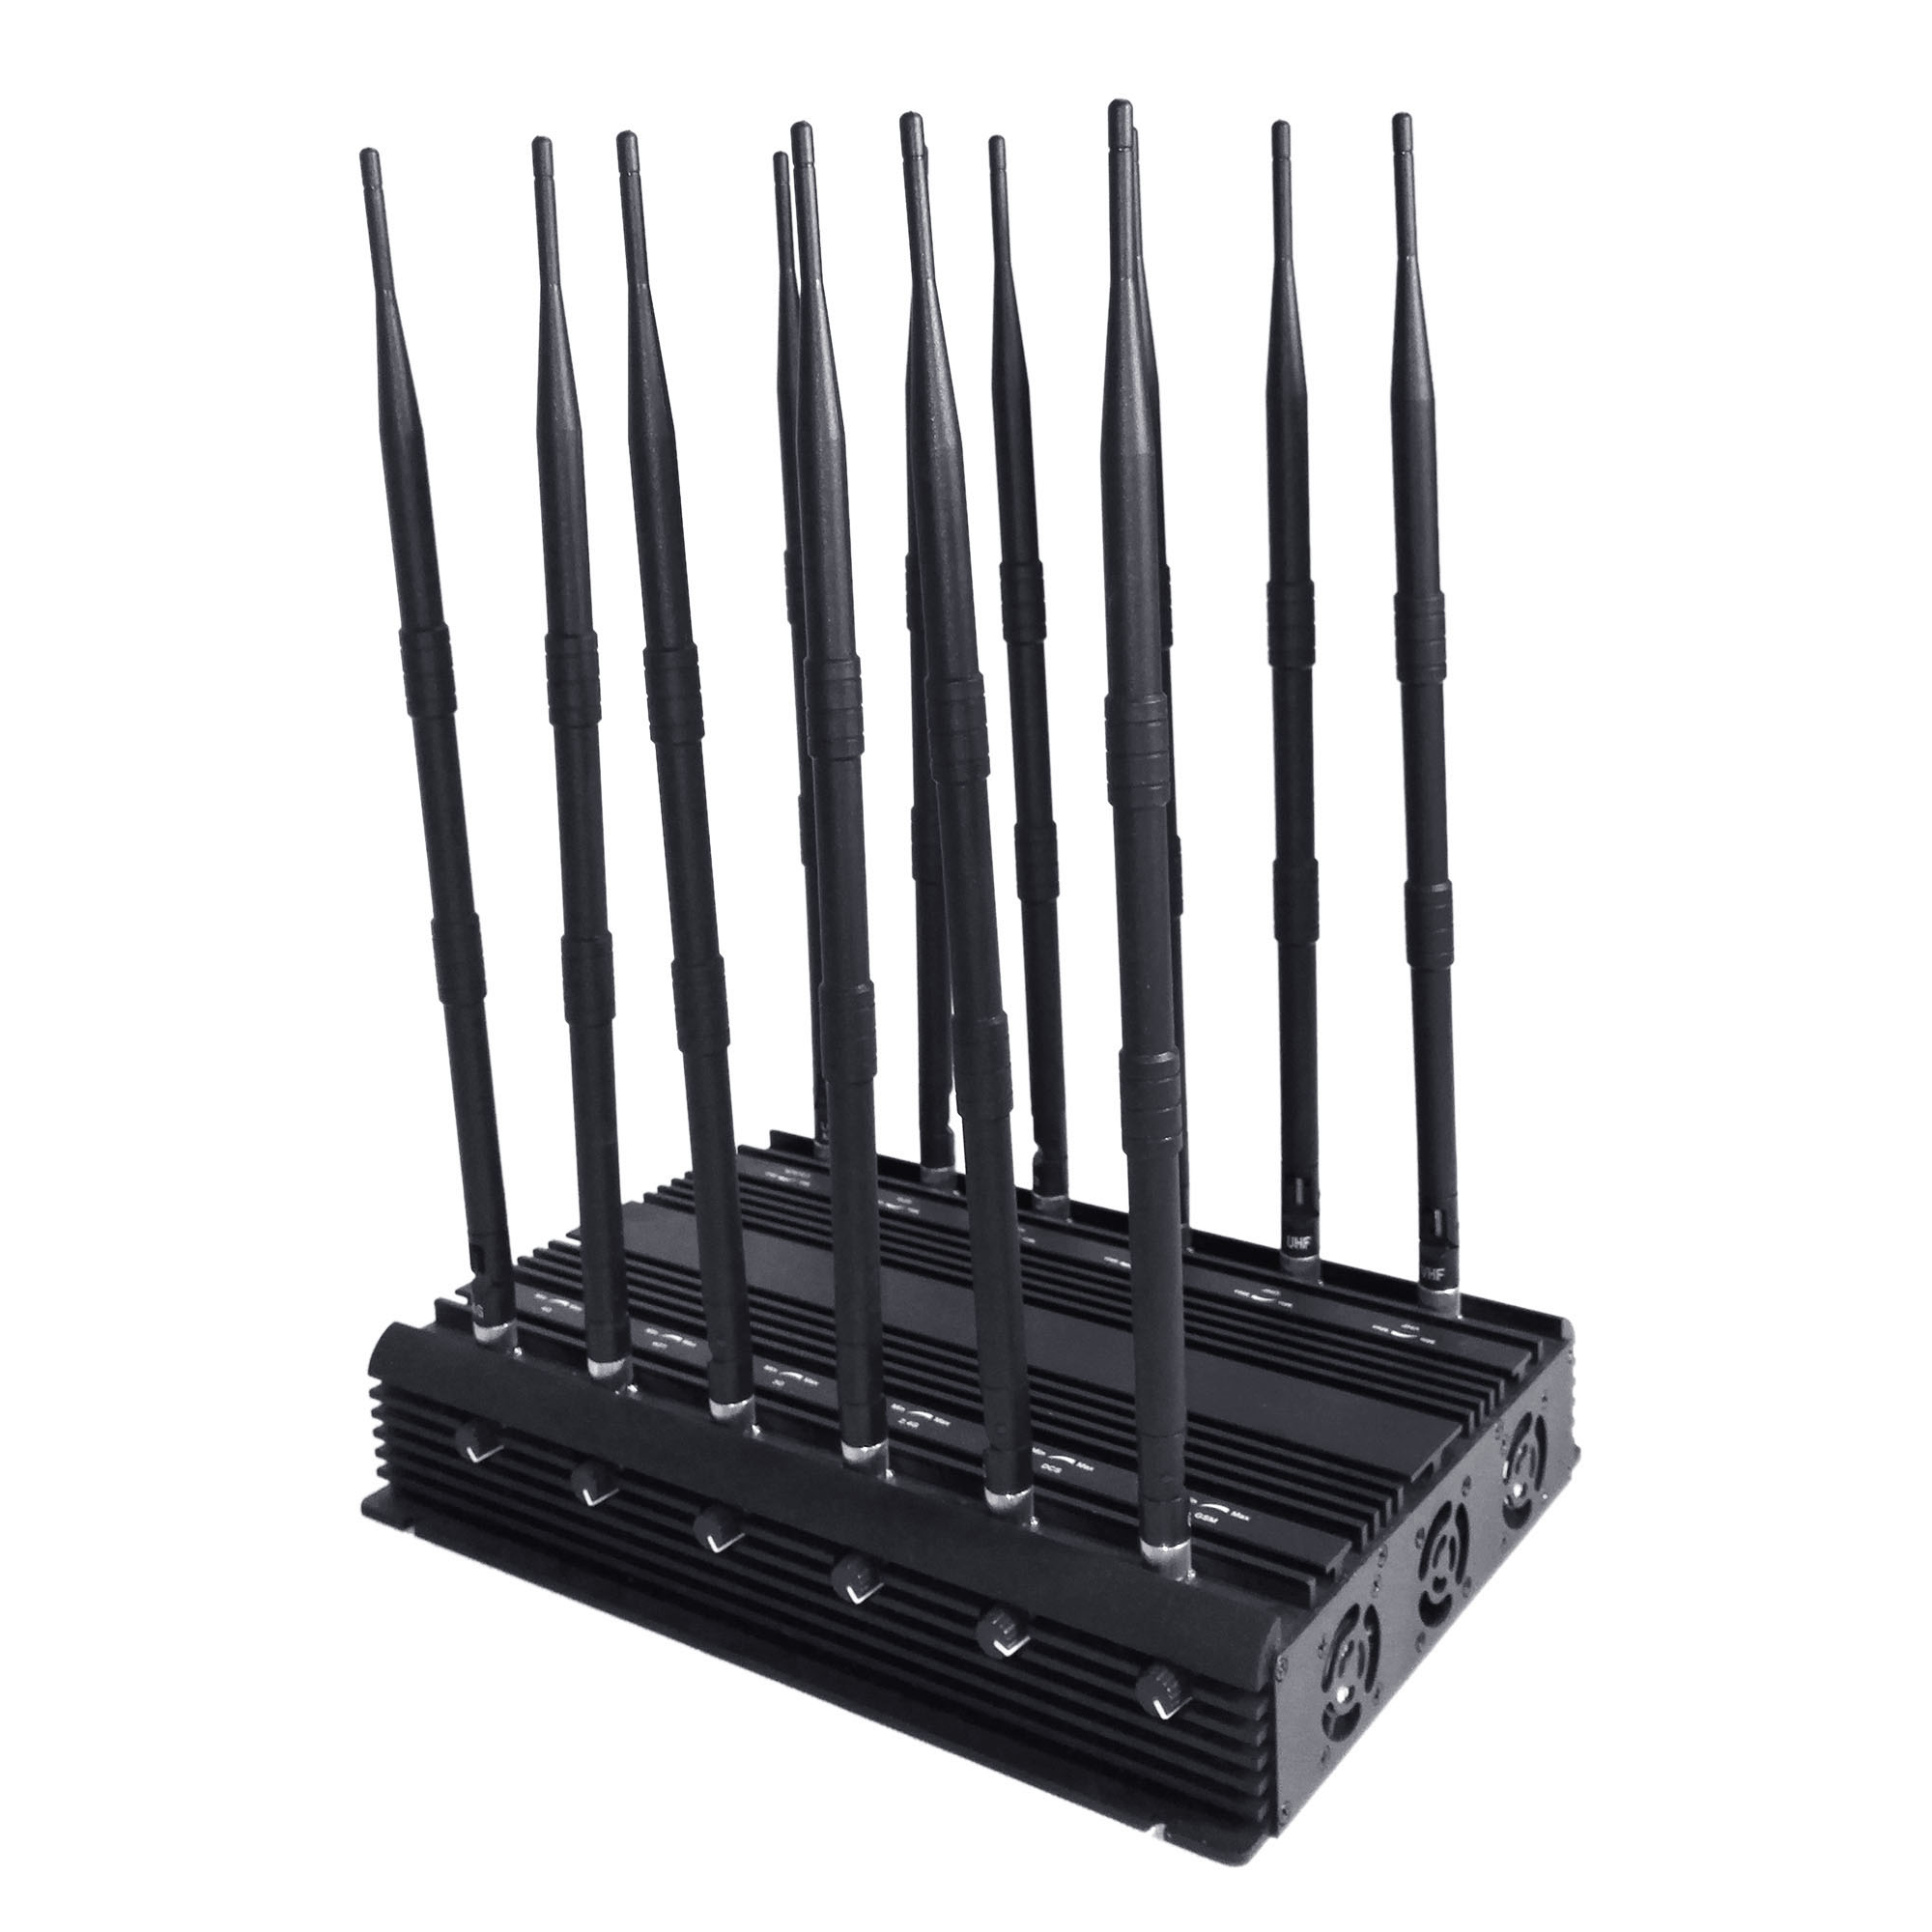 jammerall fm el paso , 12 Antennas High Power Wireless Cell Phone Jammer For 3G 4G Wi-Fi GPS LOJACK Signal Blockers